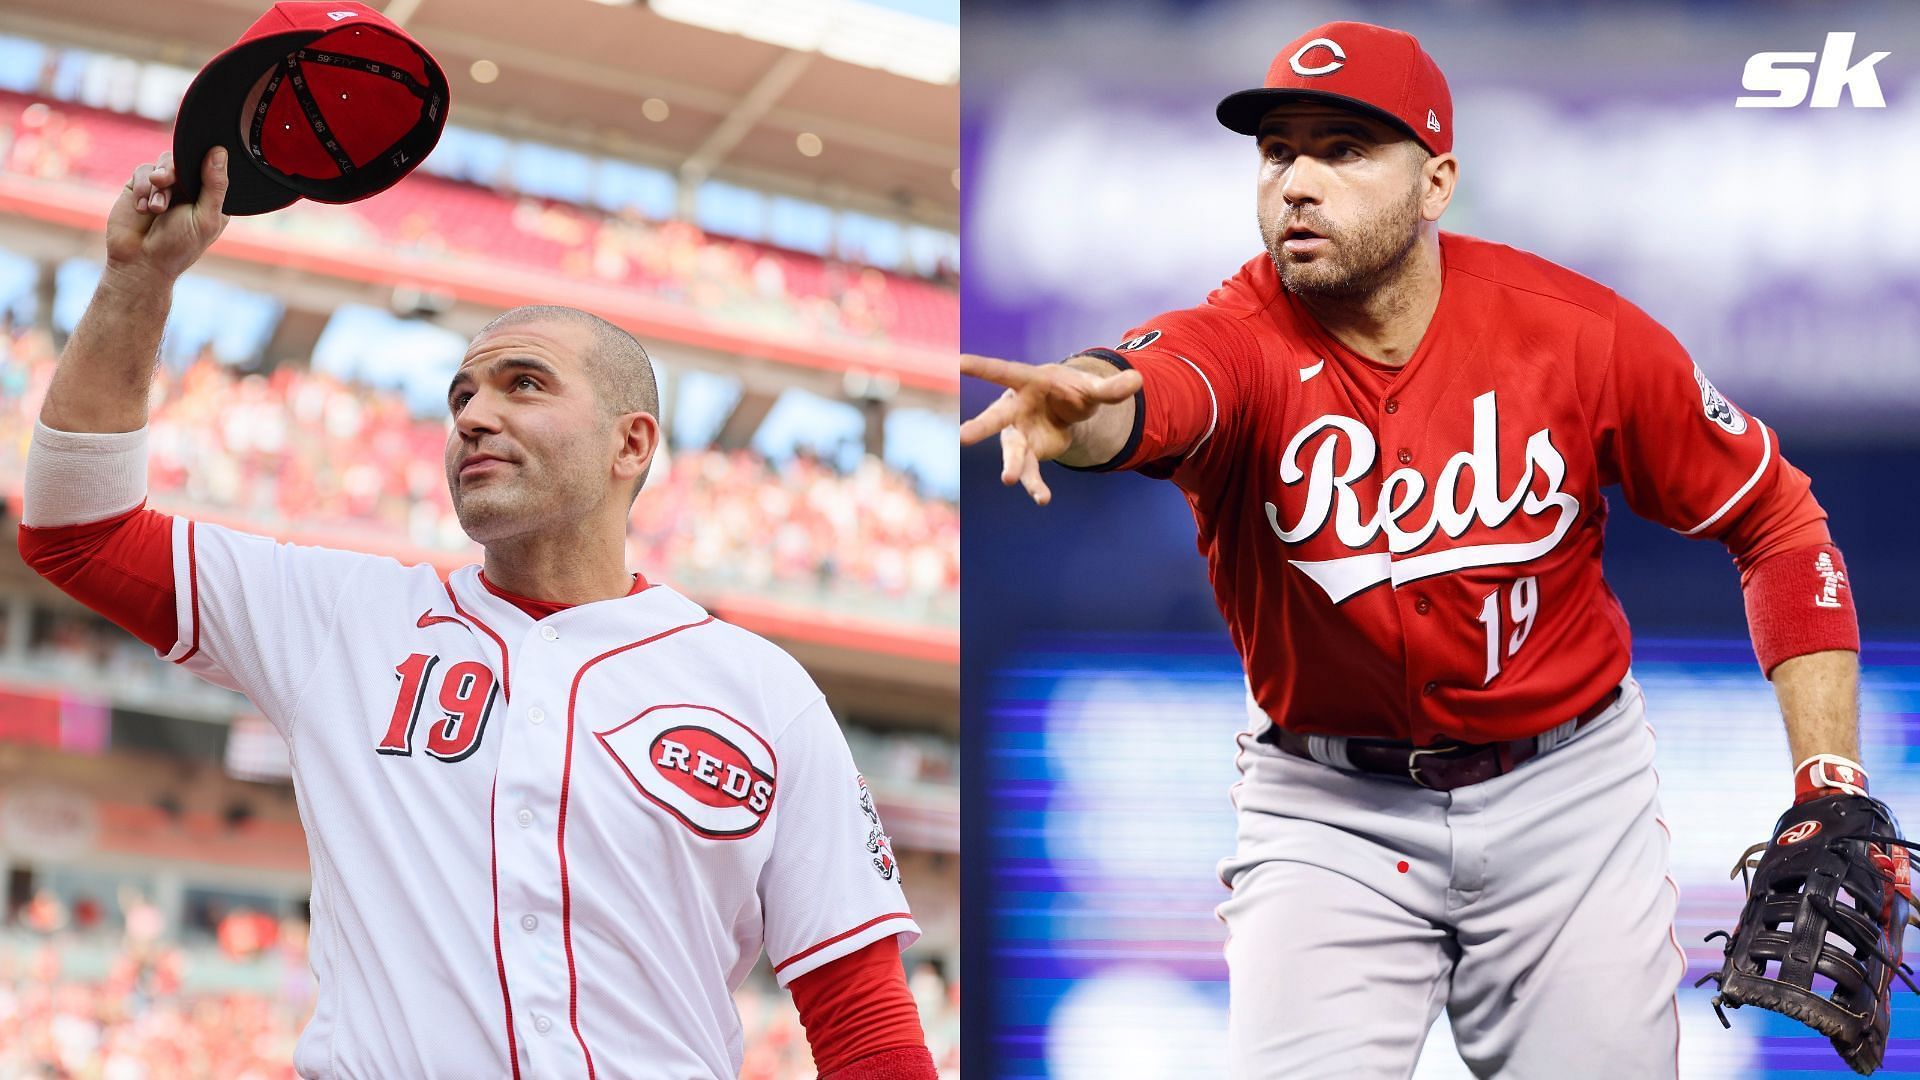 Veteran first baseman Joey Votto has been linked to a potential deal with the Toronto Blue Jays